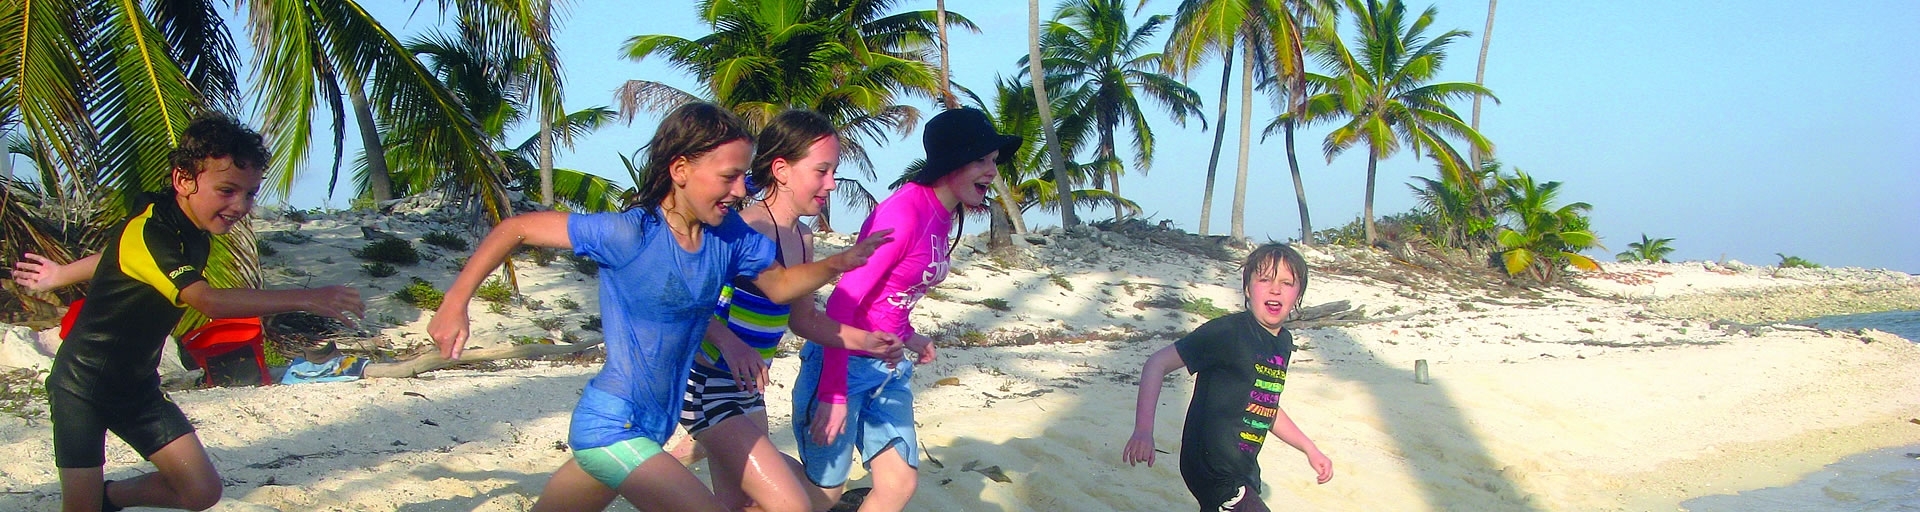 Belize Family Vacations